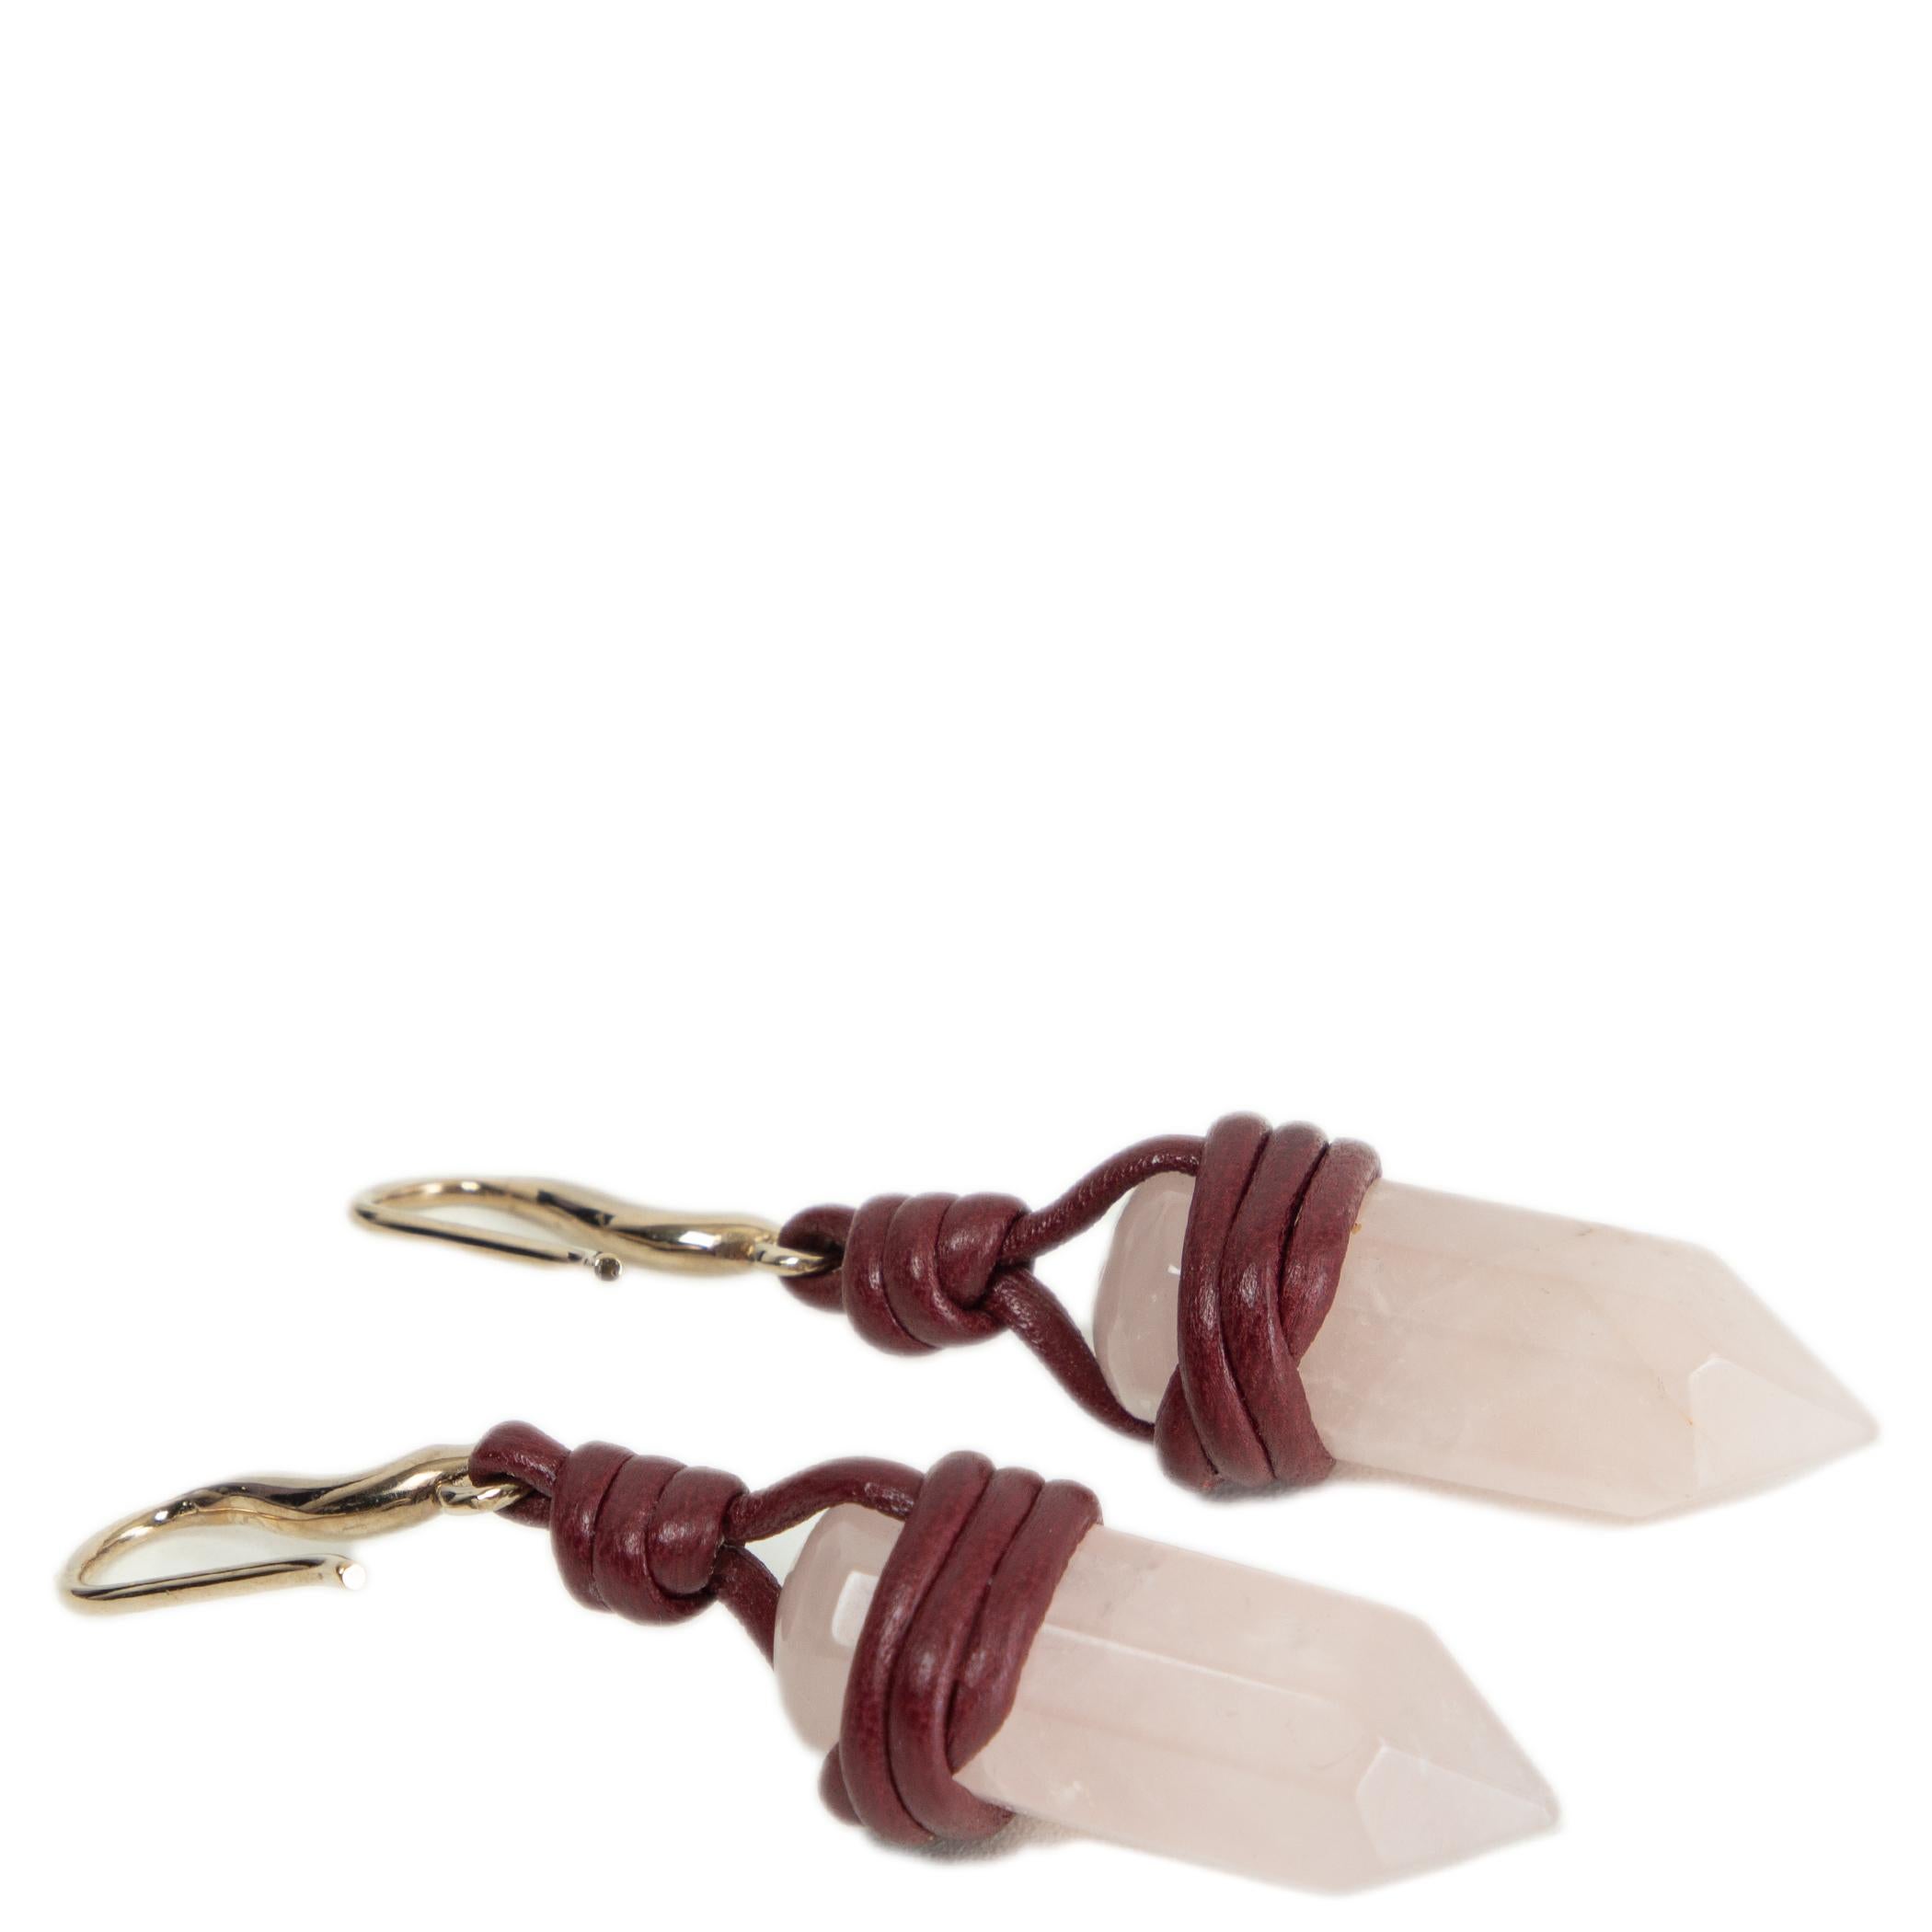 100% authentic Chloé's Jemma drop earrings will add a chic bohemian touch to your look. Made from hand-cut rose quartz with burgundy leather trims. They close with a pin fastening. Have been worn once and are in virtually new condition.